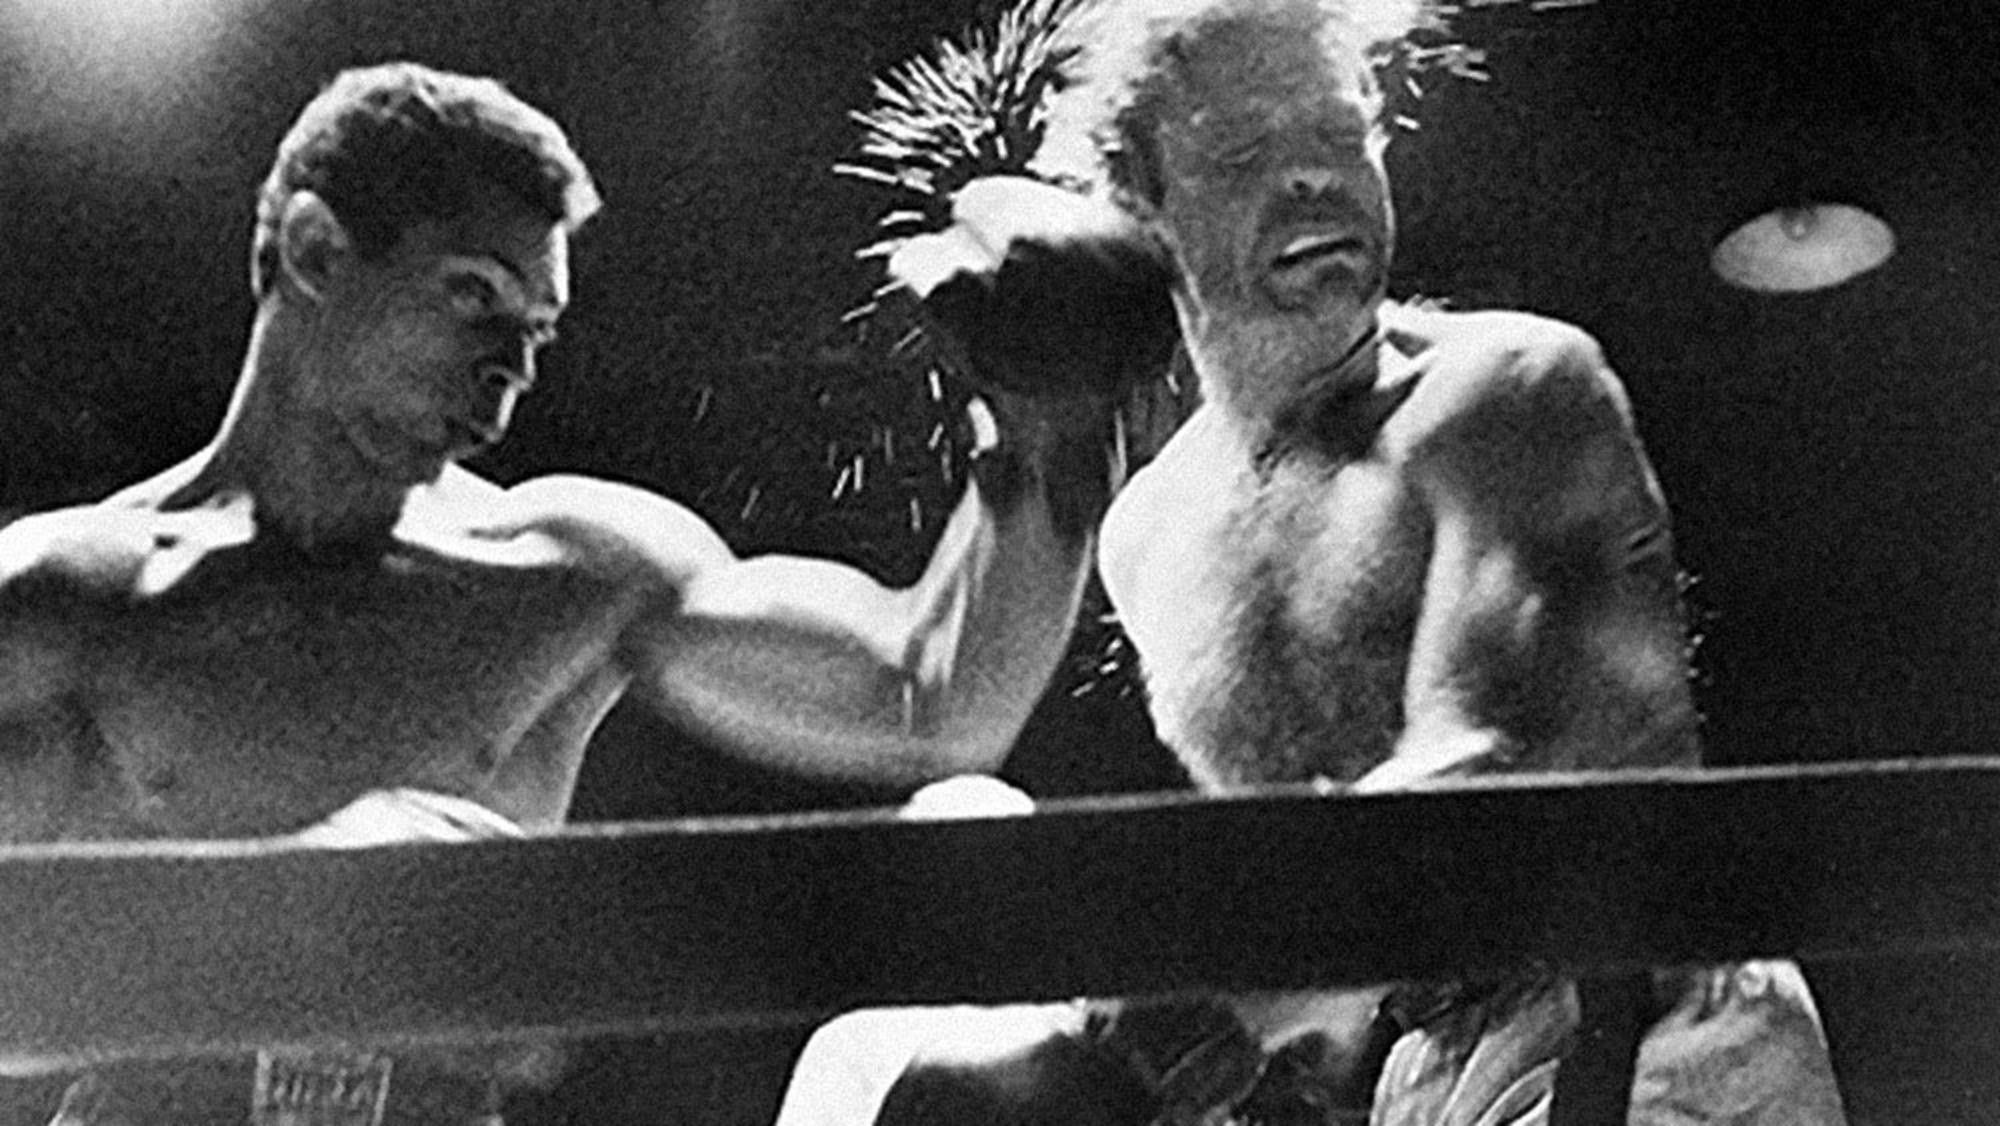 Watch Stanley Kubrick's First Short Film 'Day of the Fight'